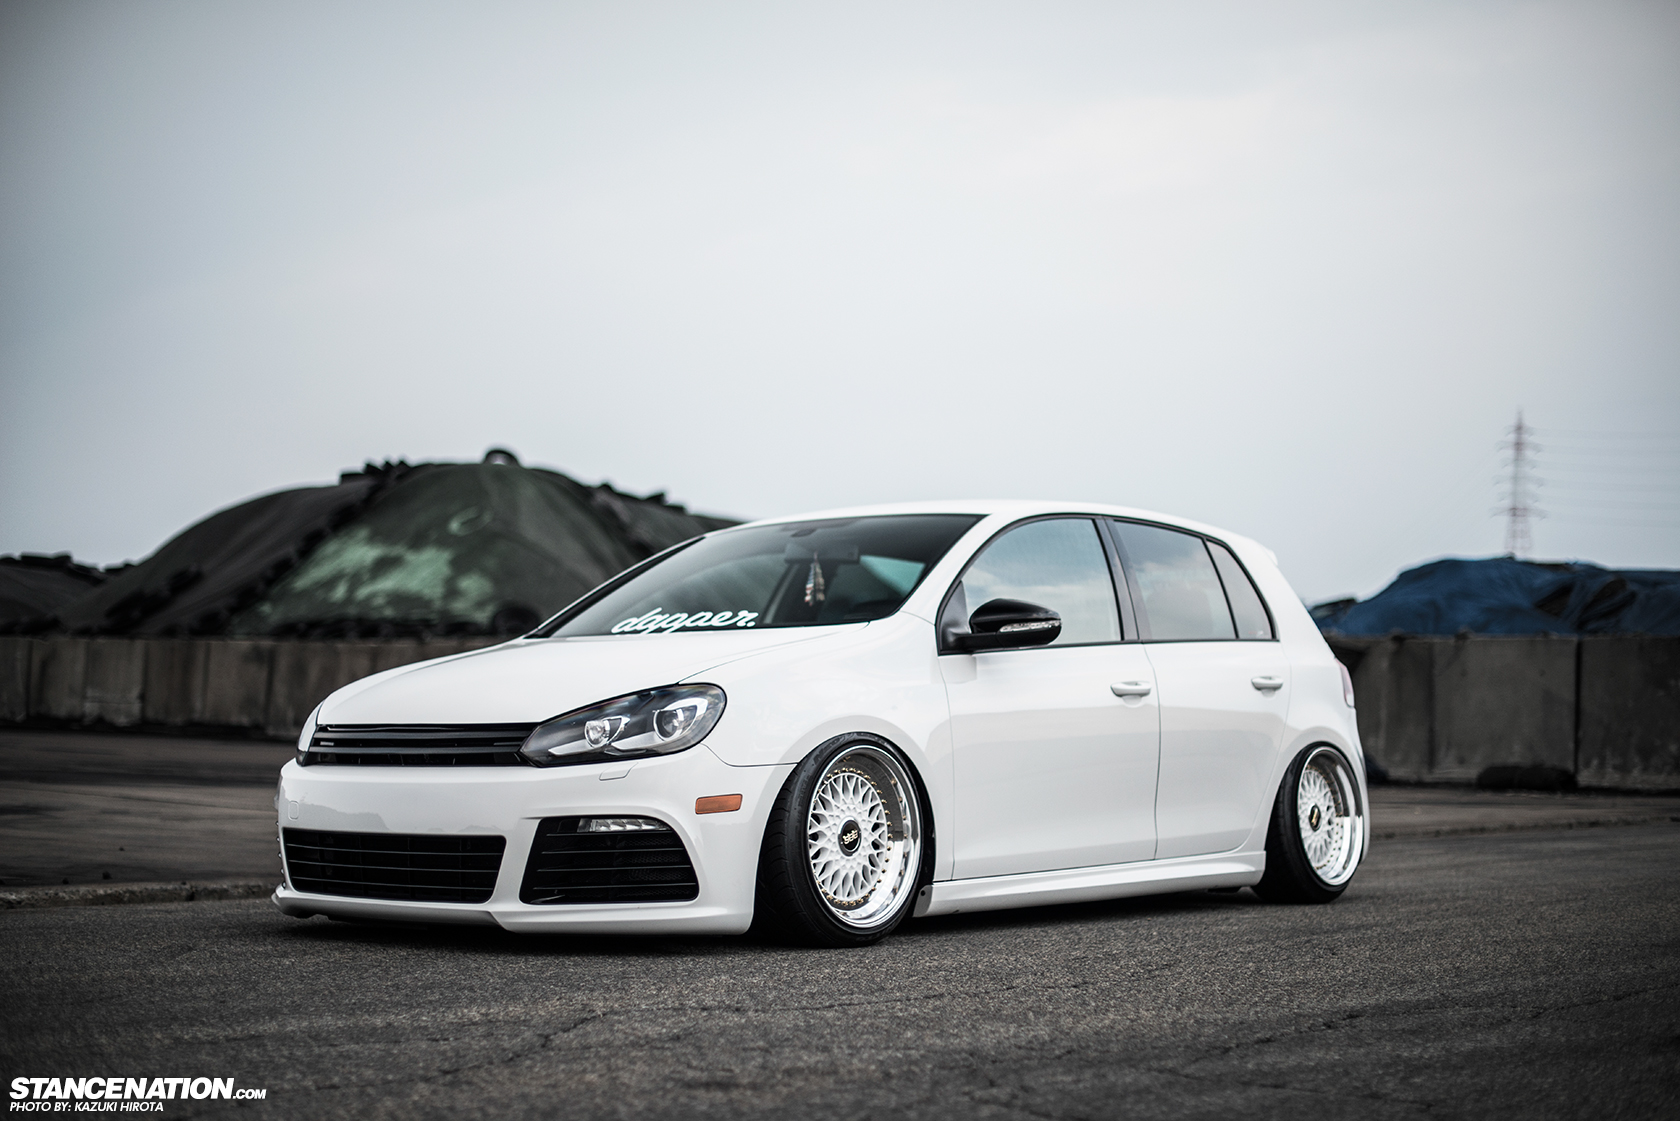 Stanced Vw Golf Gti wallpapers for desktop, download free Stanced Vw Golf  Gti pictures and backgrounds for PC